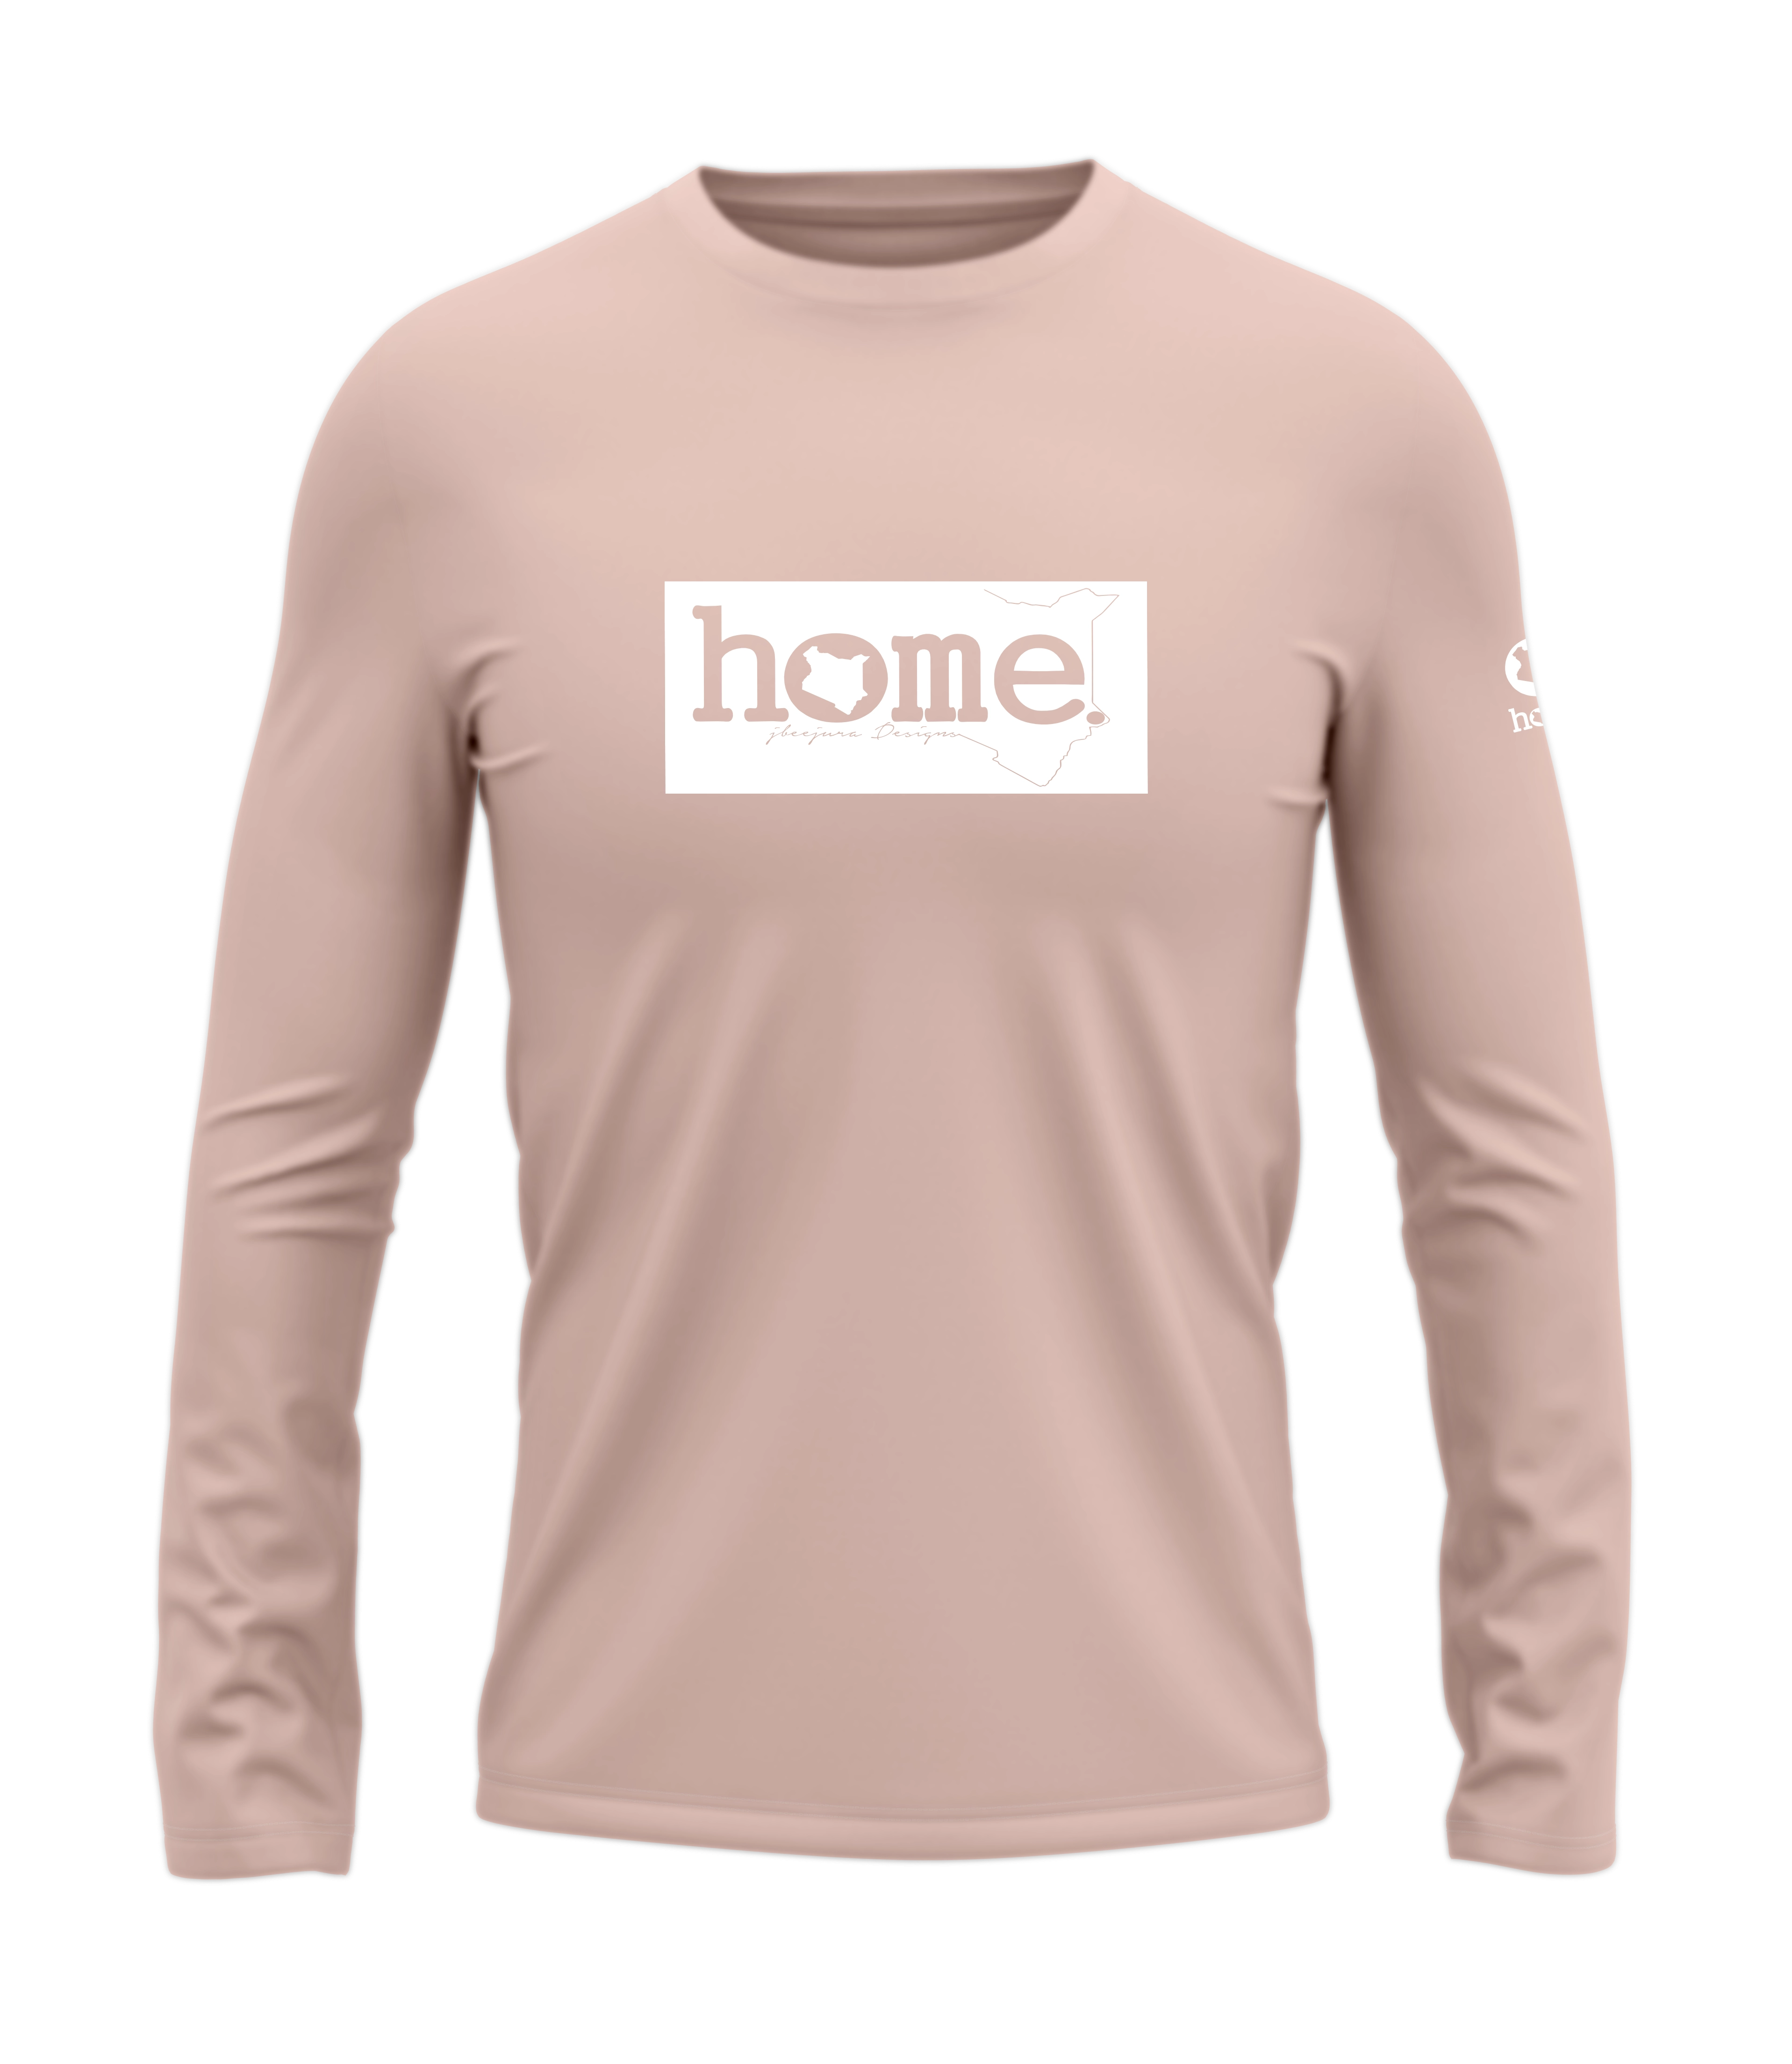 home_254 LONG-SLEEVED PEACH T-SHIRT WITH A WHITE CLASSIC PRINT – COTTON PLUS FABRIC